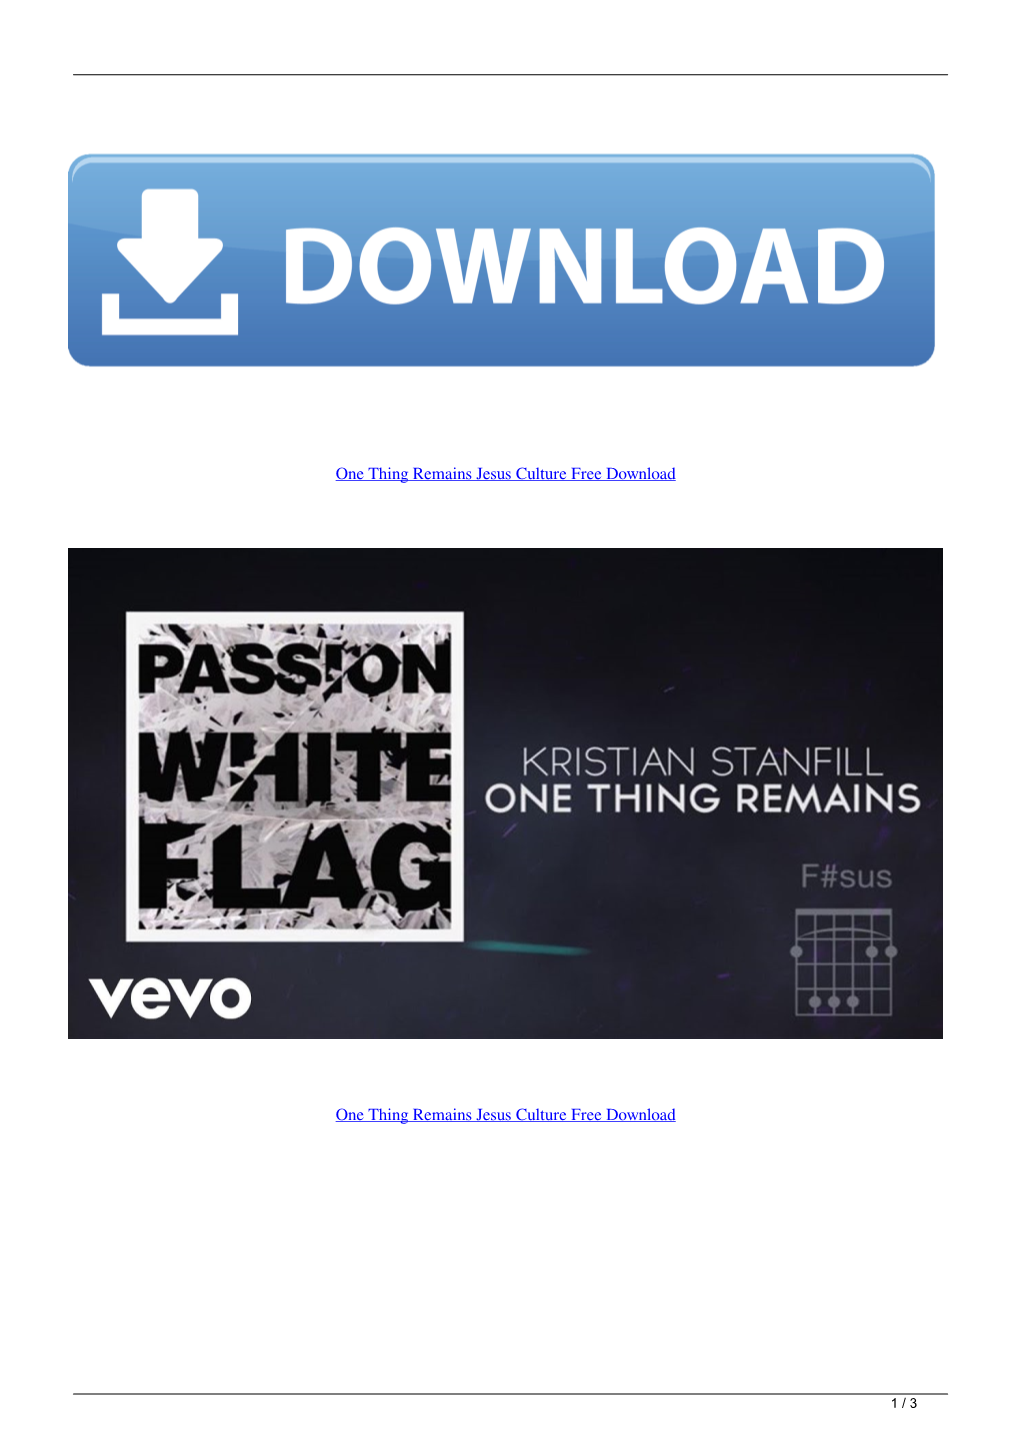 One Thing Remains Jesus Culture Free Download